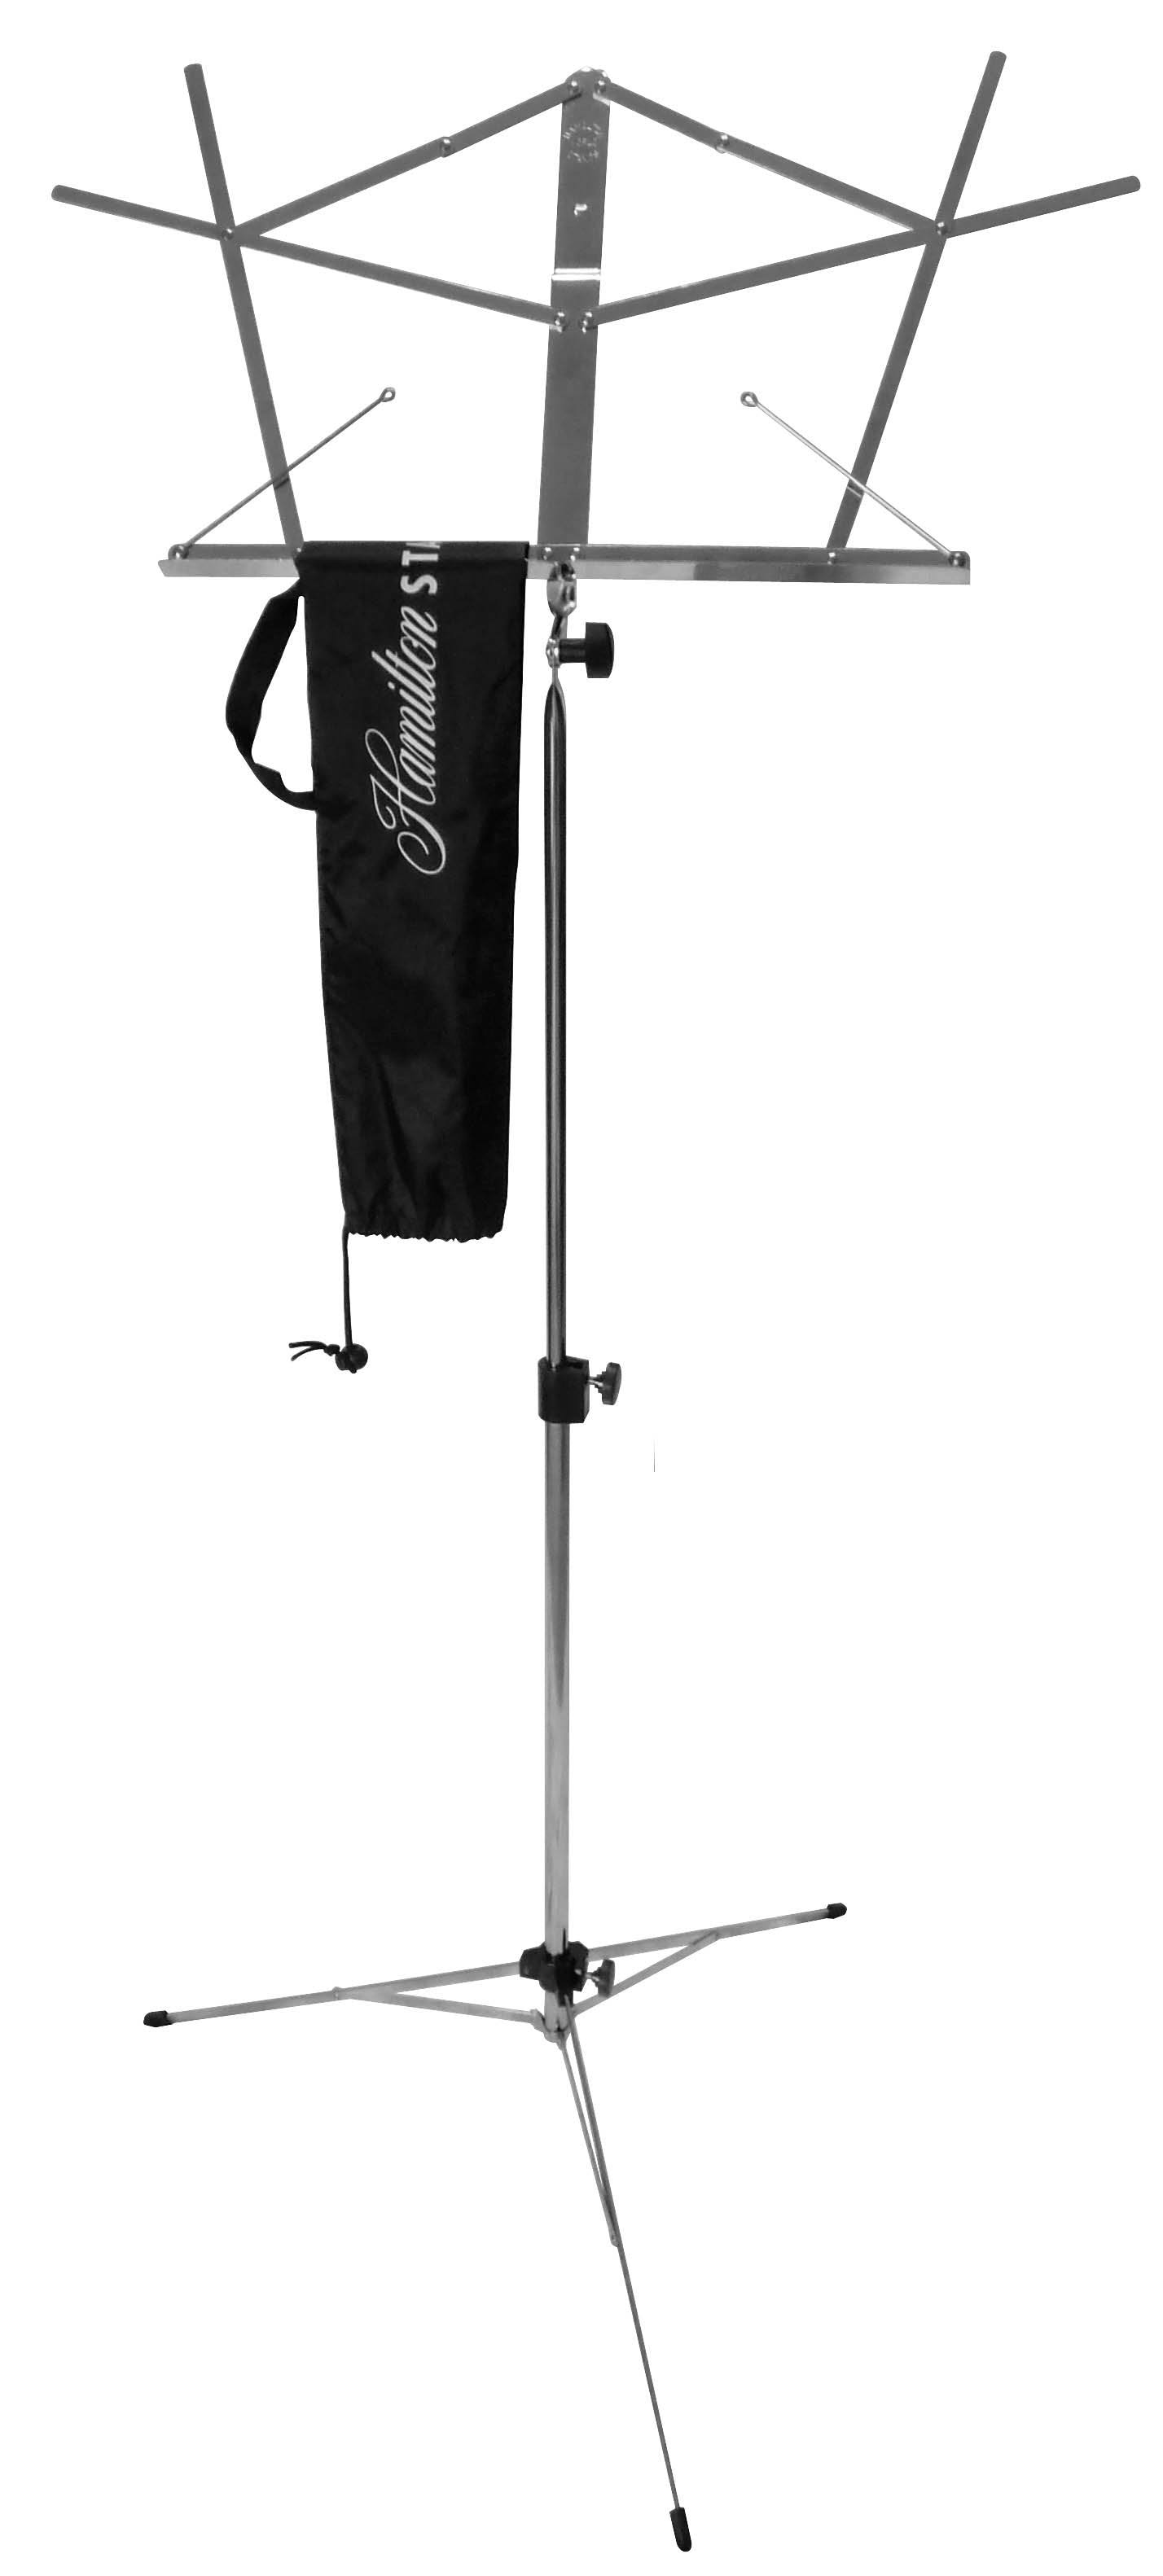 Hamilton Stands Deluxe Folding Sheet Music Stand - Nickel Finish